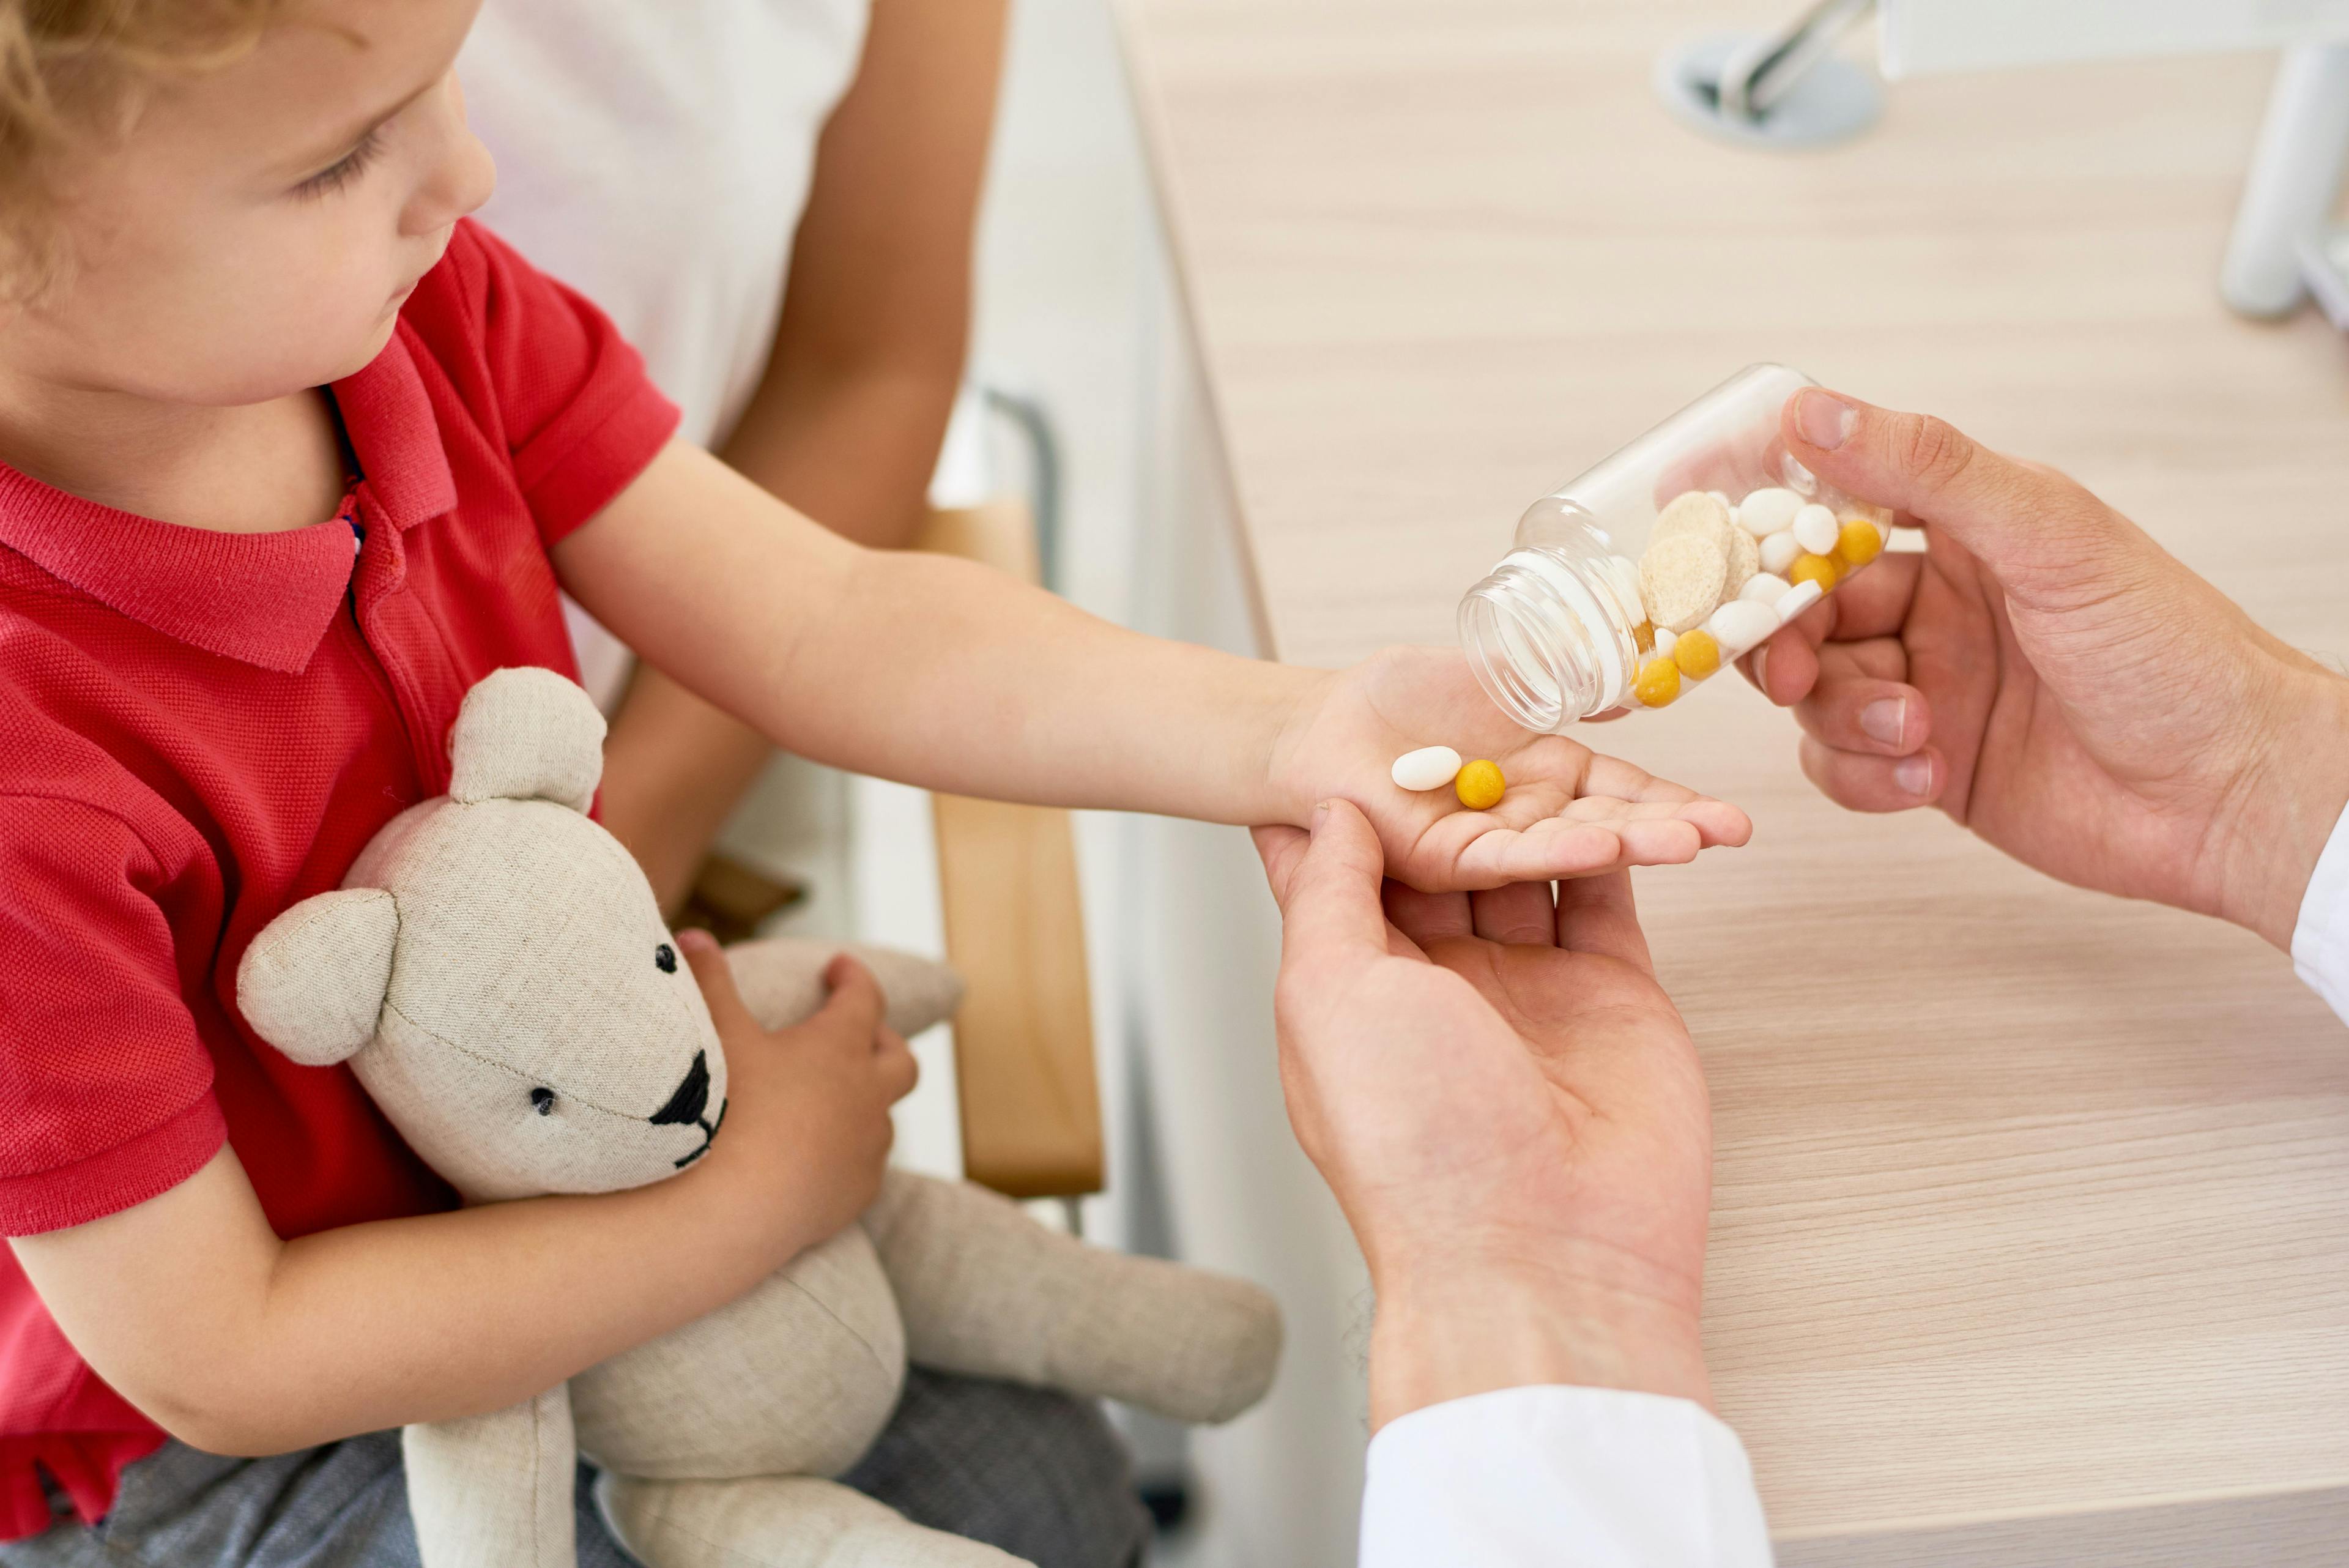 At what rates were children hospitalized with COVID-19 prescribed antibiotics?